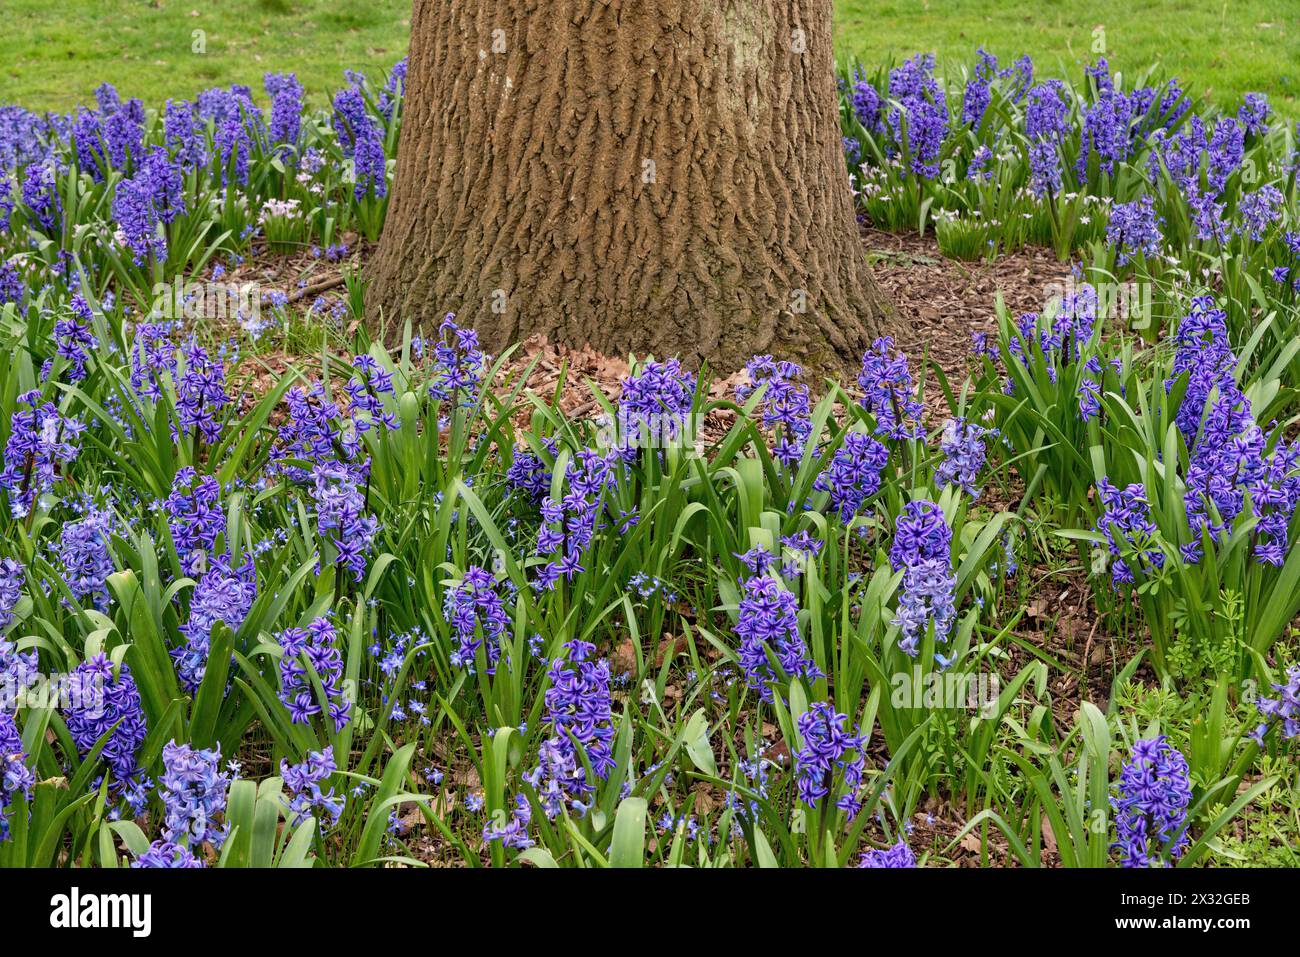 A mass of blue flowering Hyacinths, Hyacinthus orientalis growing round a tree trunk in a garden England UK Stock Photo